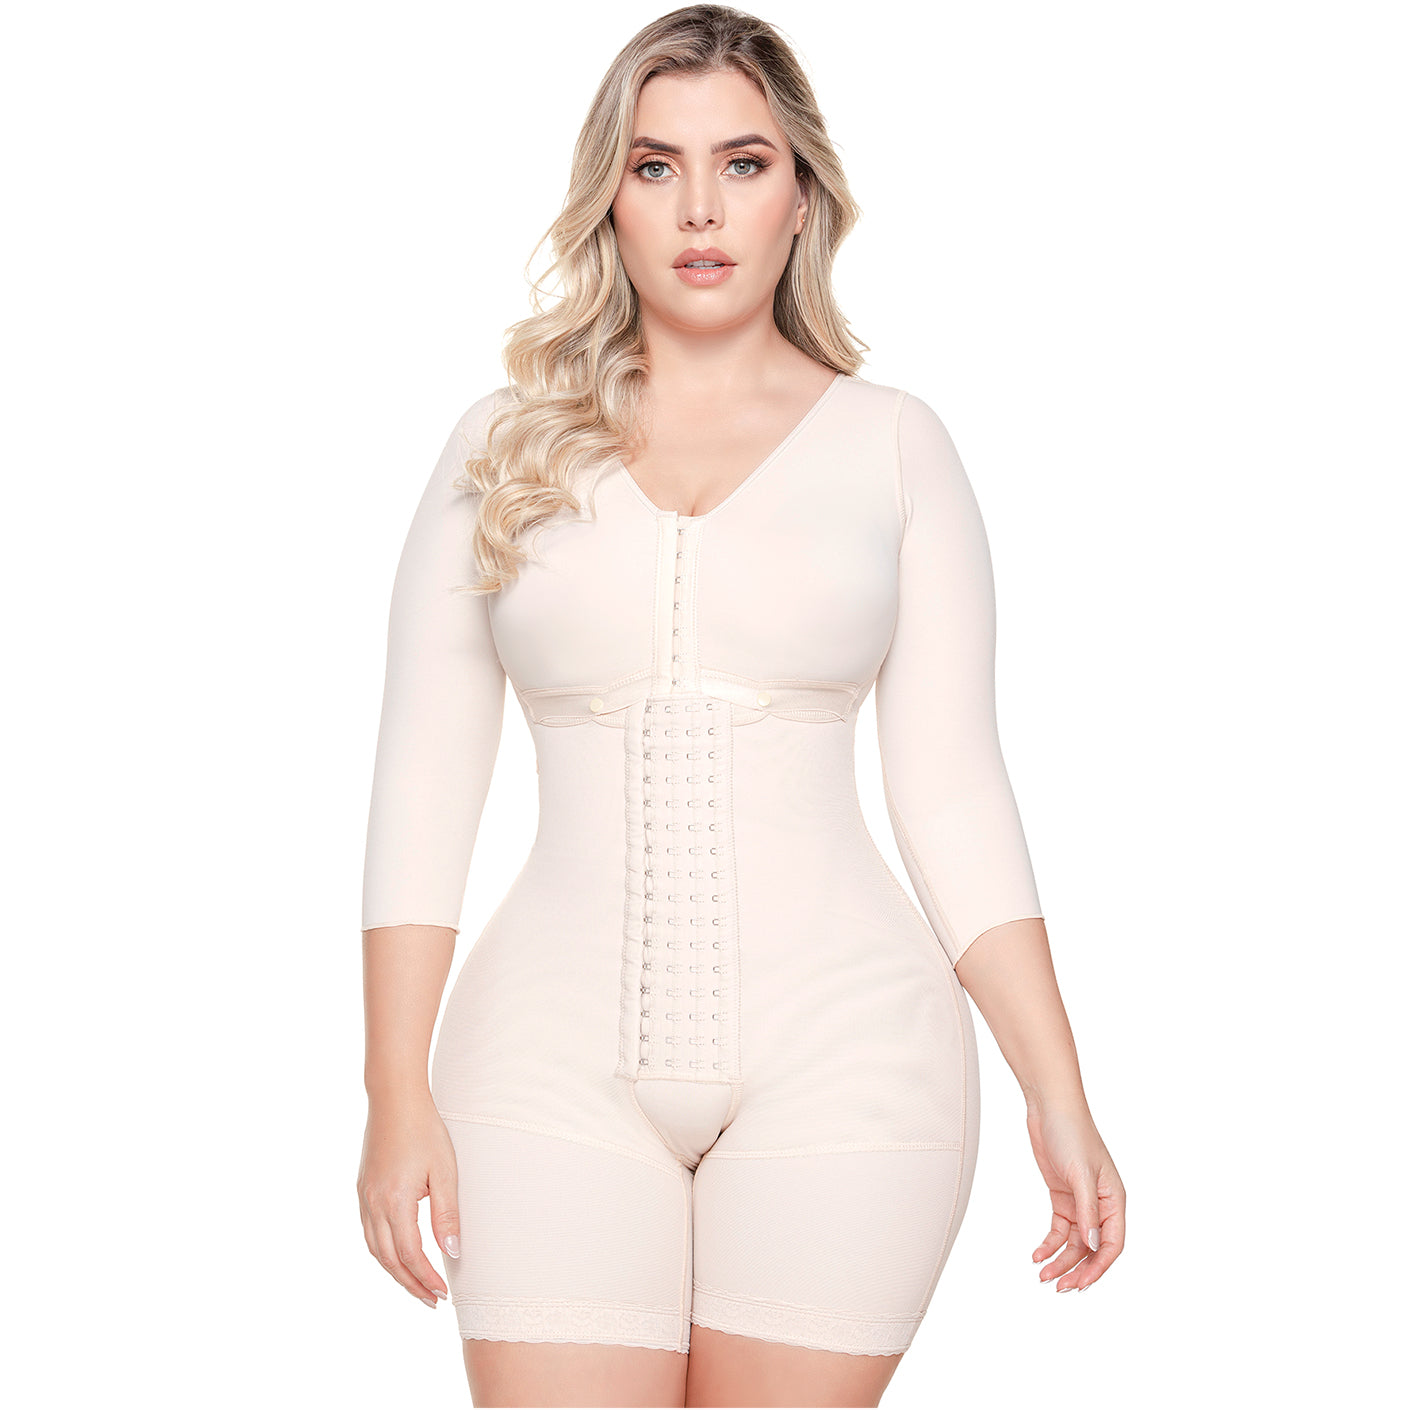 Buy Post-Surgical Faja Colombiana at best prices only in AnnaMarye